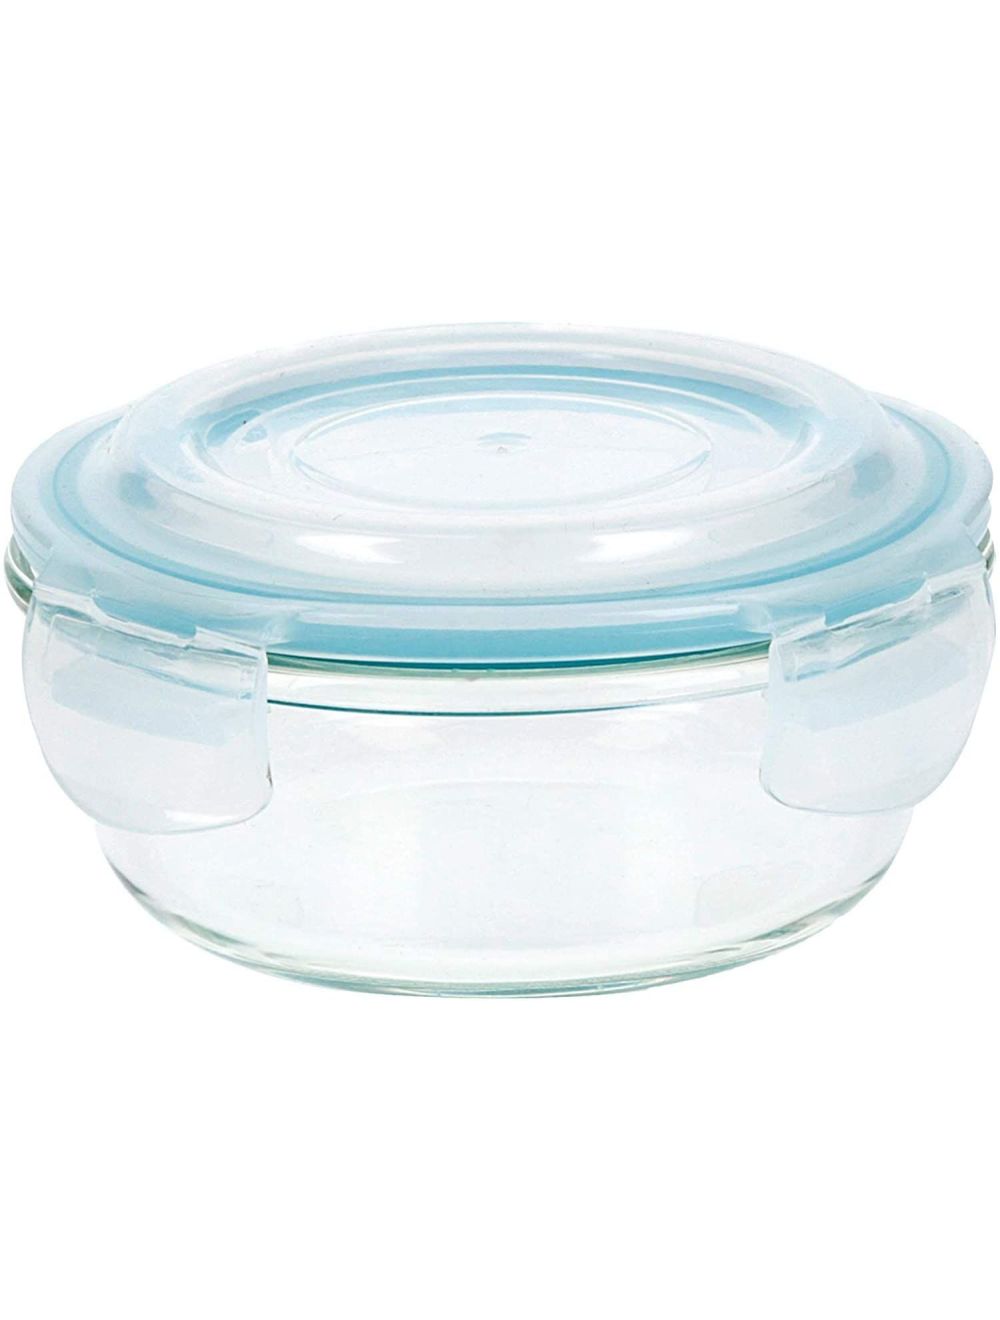 Neoflam Cloc 0.4 Litre Glass Storage - Clear-cl-gb-y40